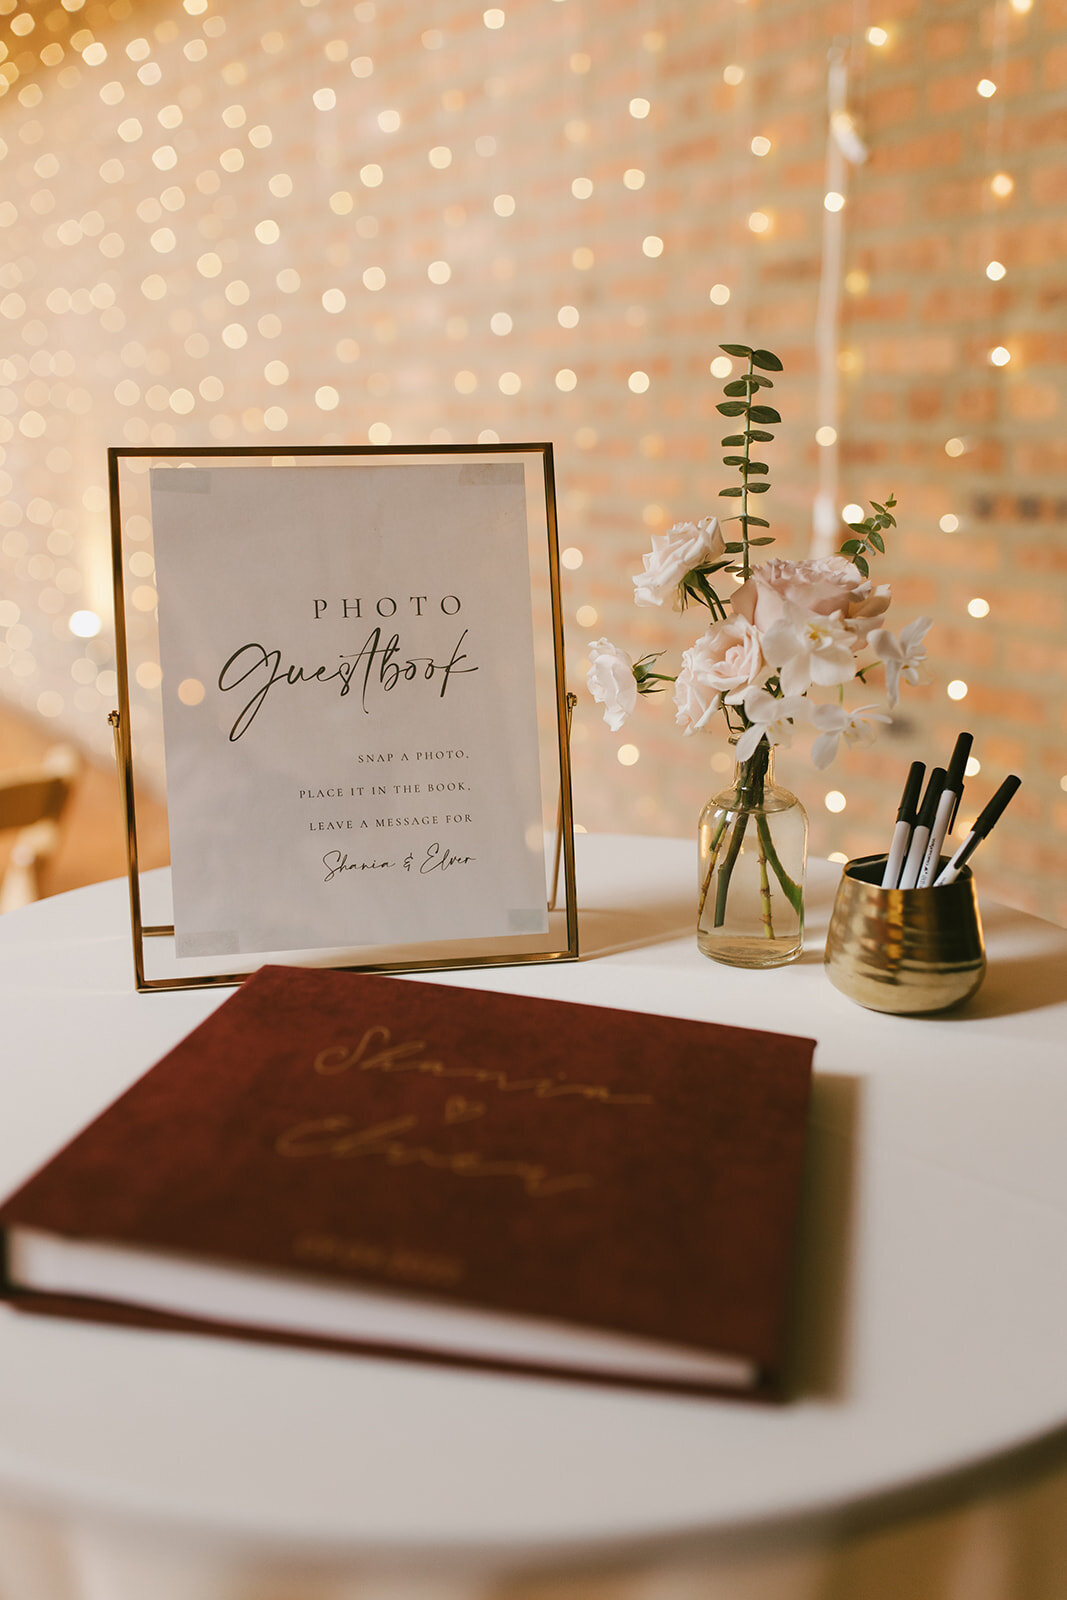 Guestbook table at Loft on Lake Chicago wedding with romantic twinkle lights in background.